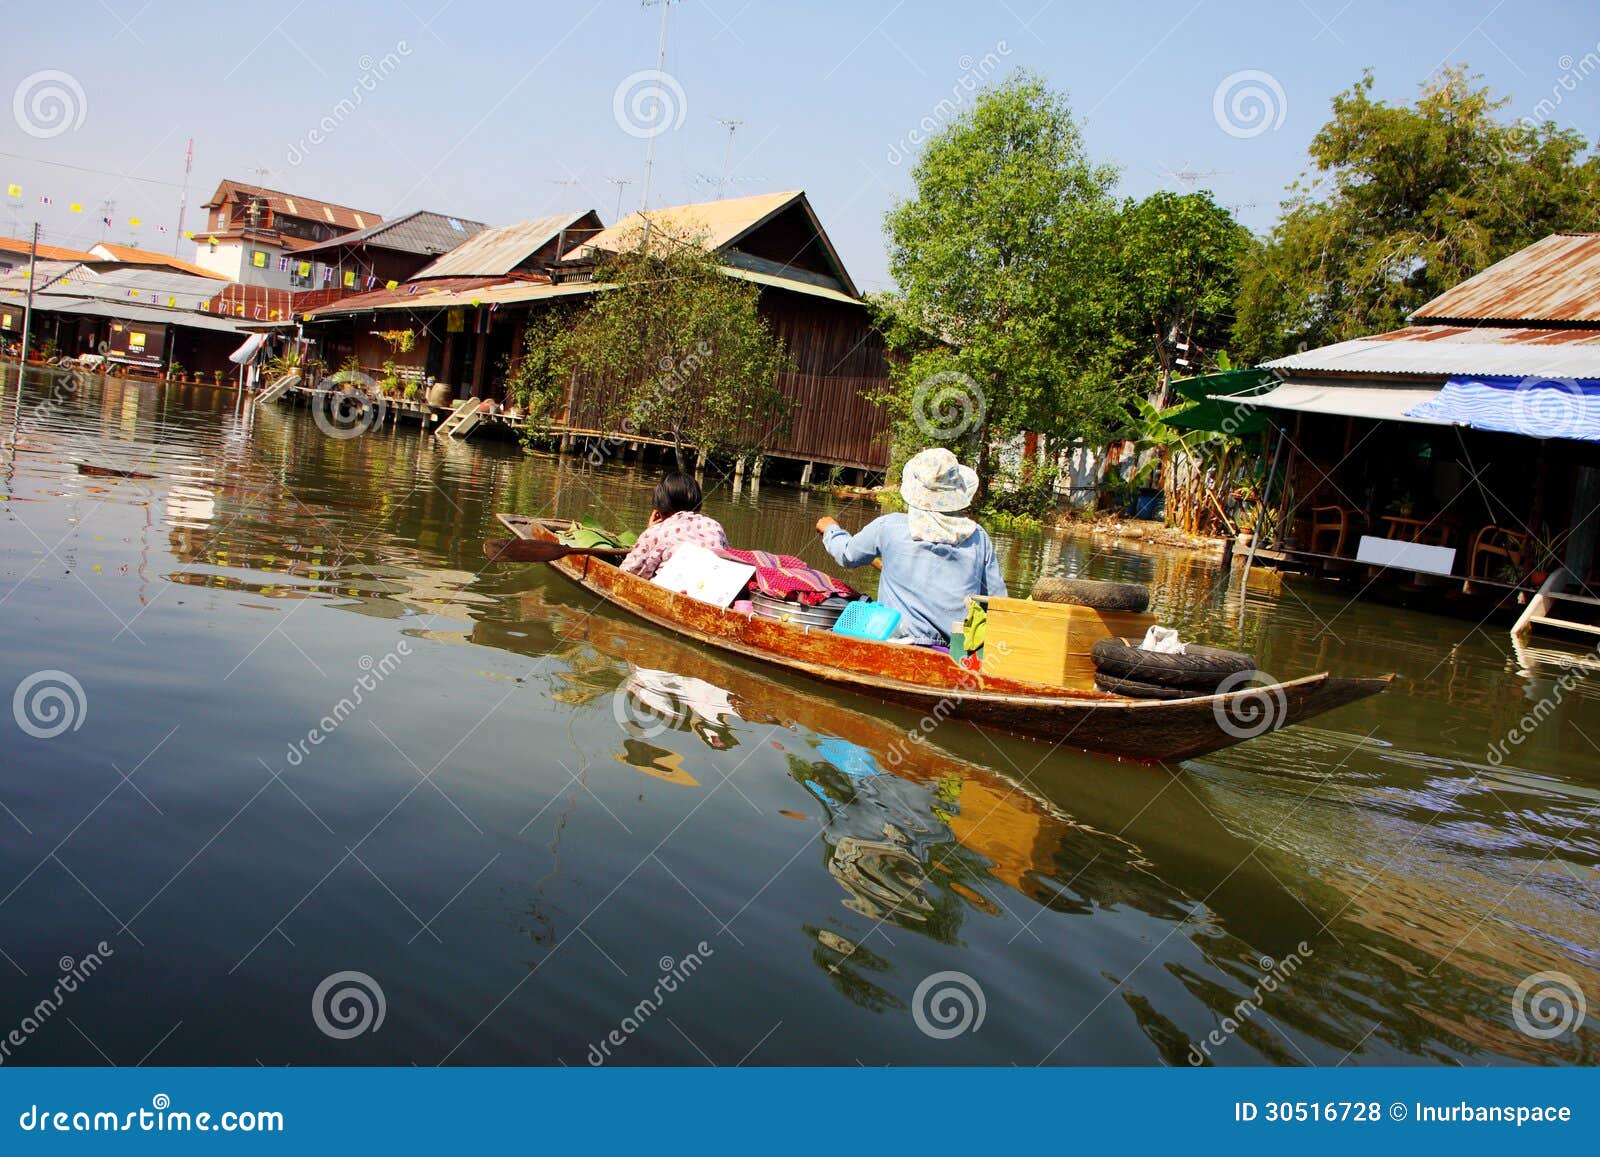 Traditional Transportation, Wooden Boat In Canal, Thailand 